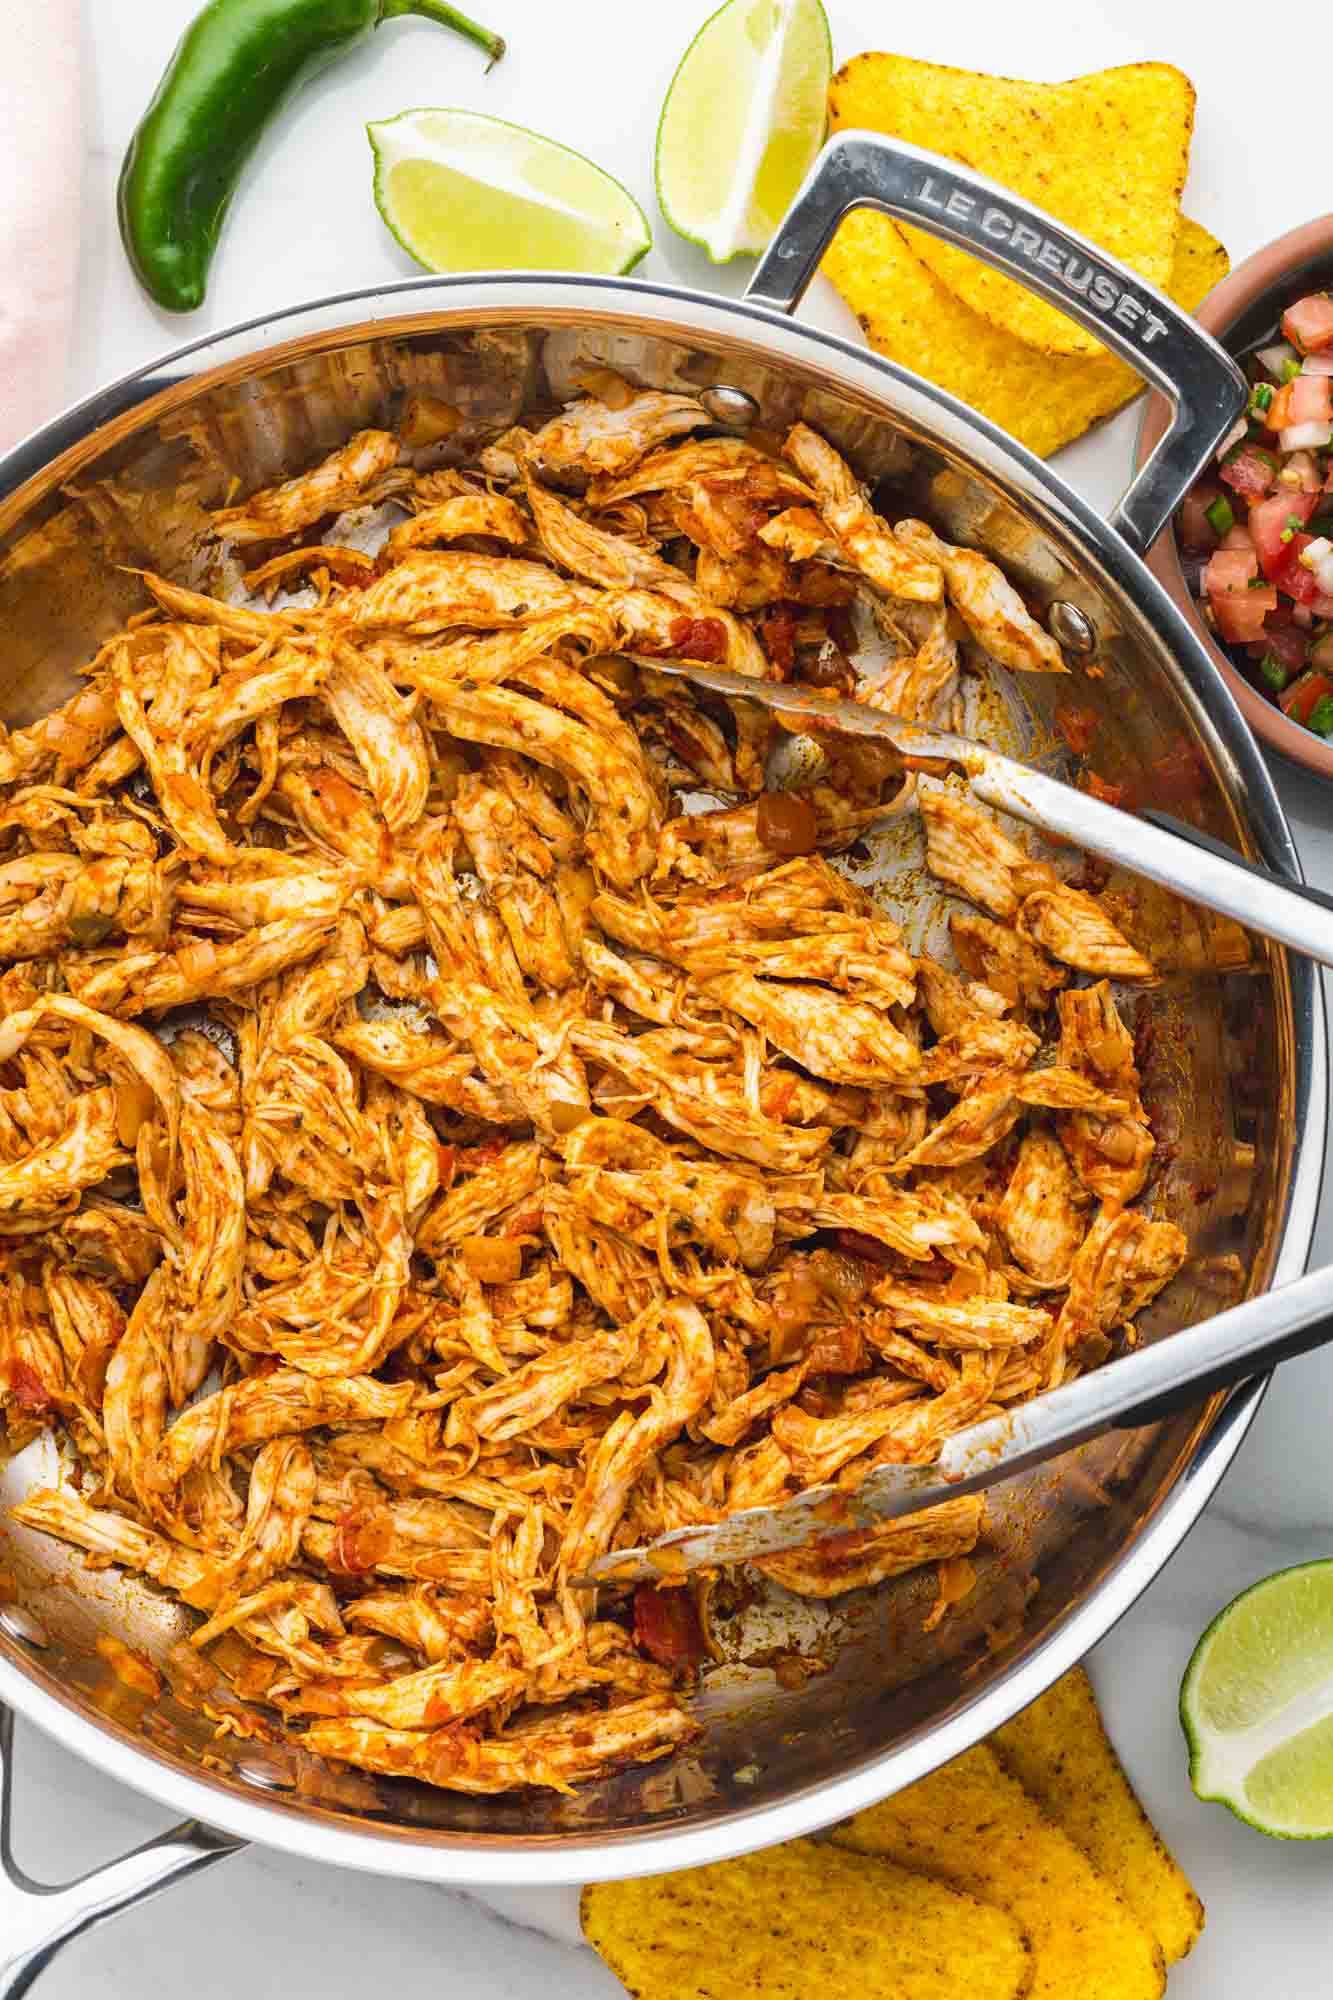 Shredded chicken taco meat in a skillet